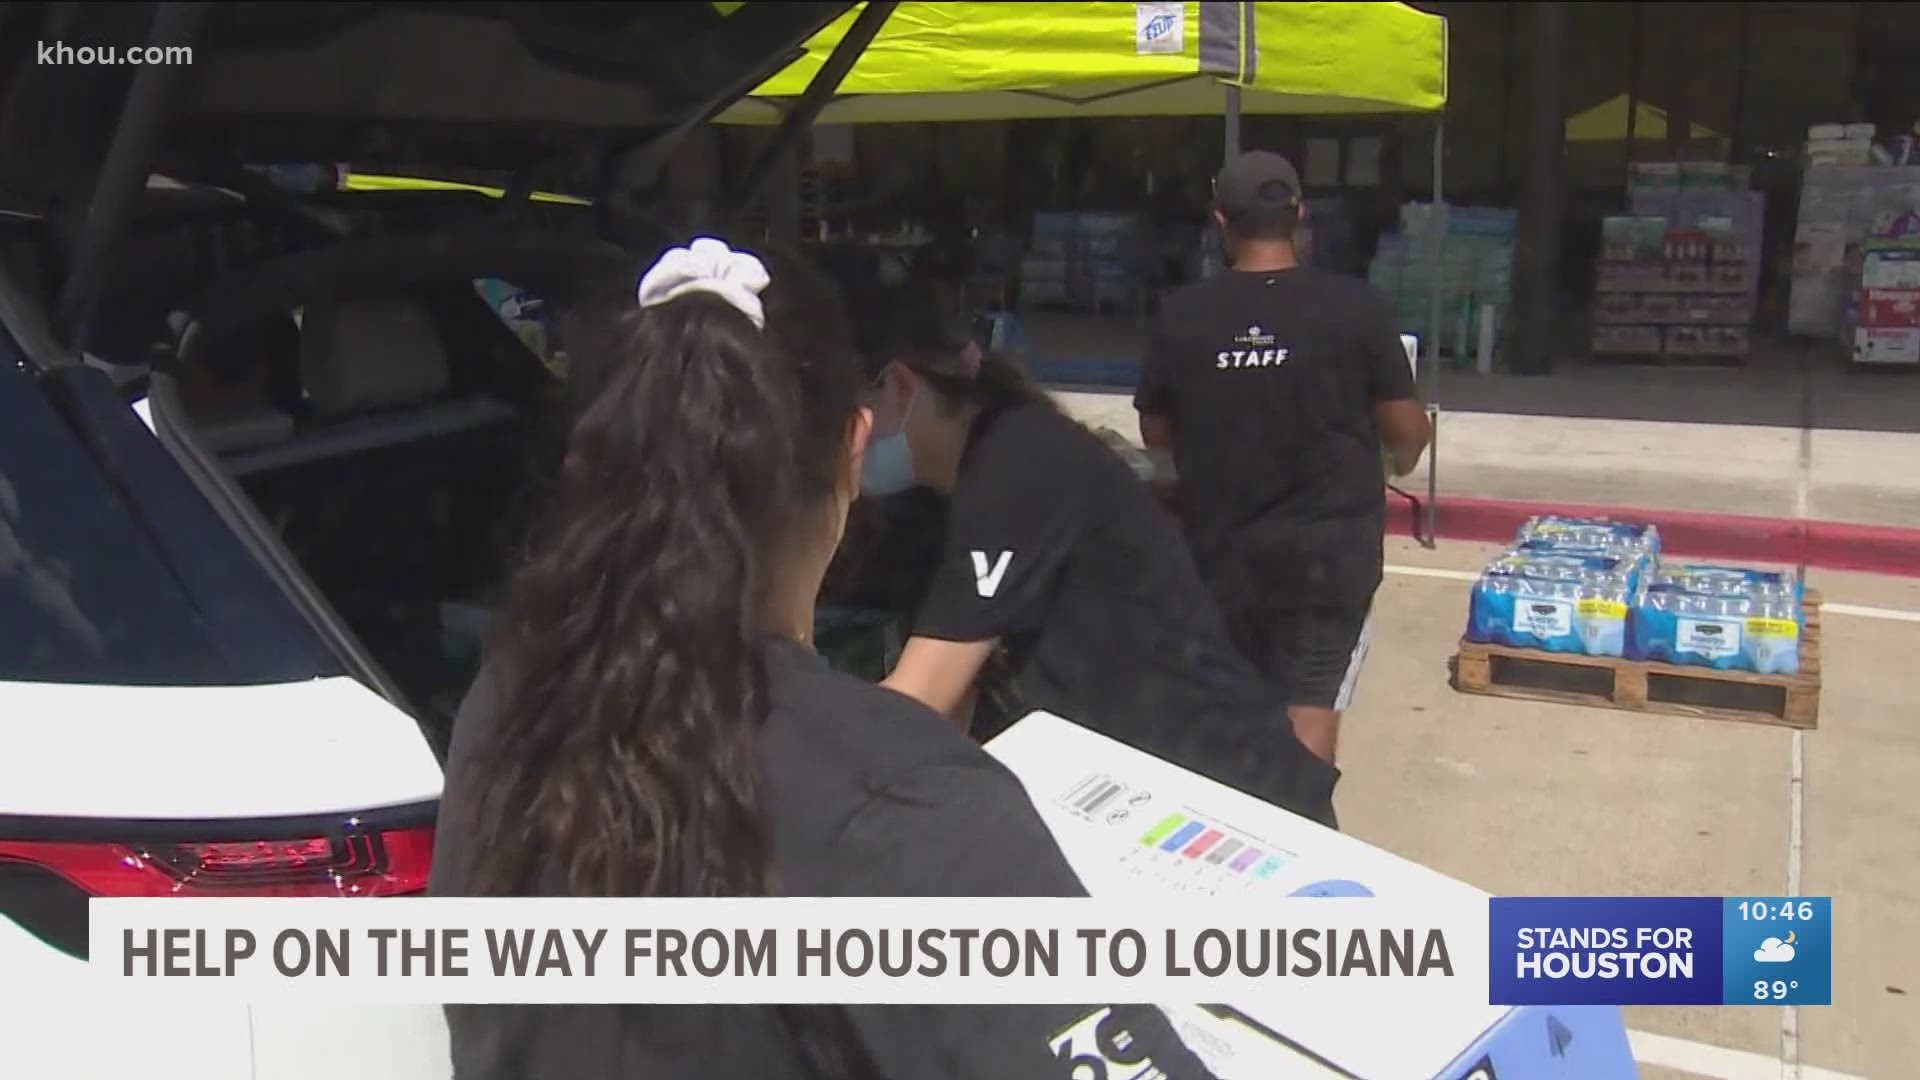 Hours after Hurricane Laura’s landfall, Texans were already on the ground in the neighboring state ready to help.